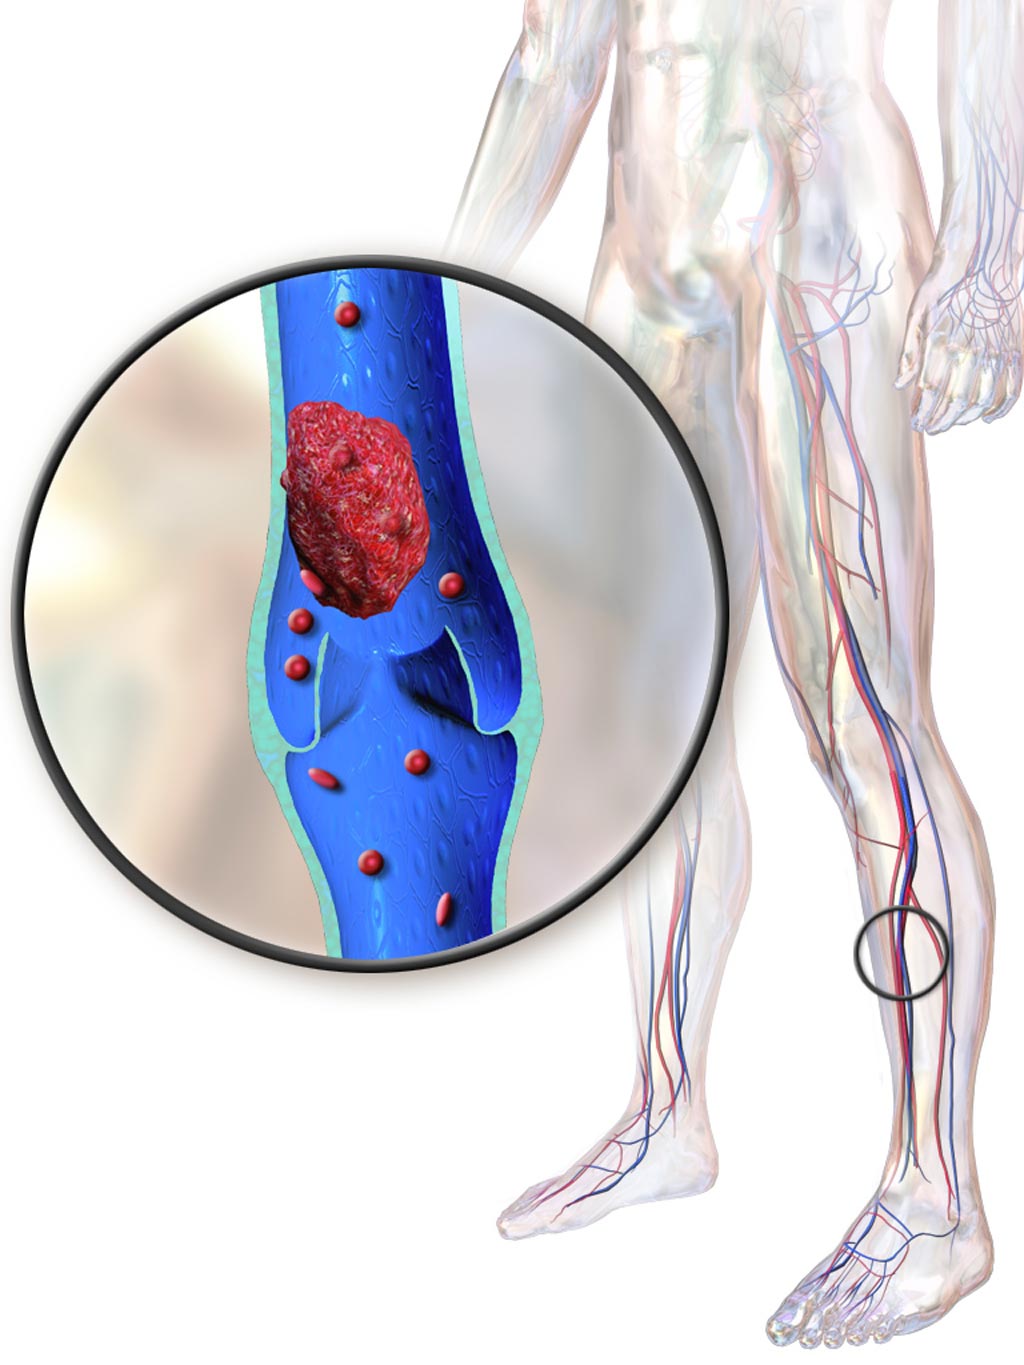 Image: An illustration depicting a deep vein thrombosis (Photo courtesy of Wikimedia Commons).